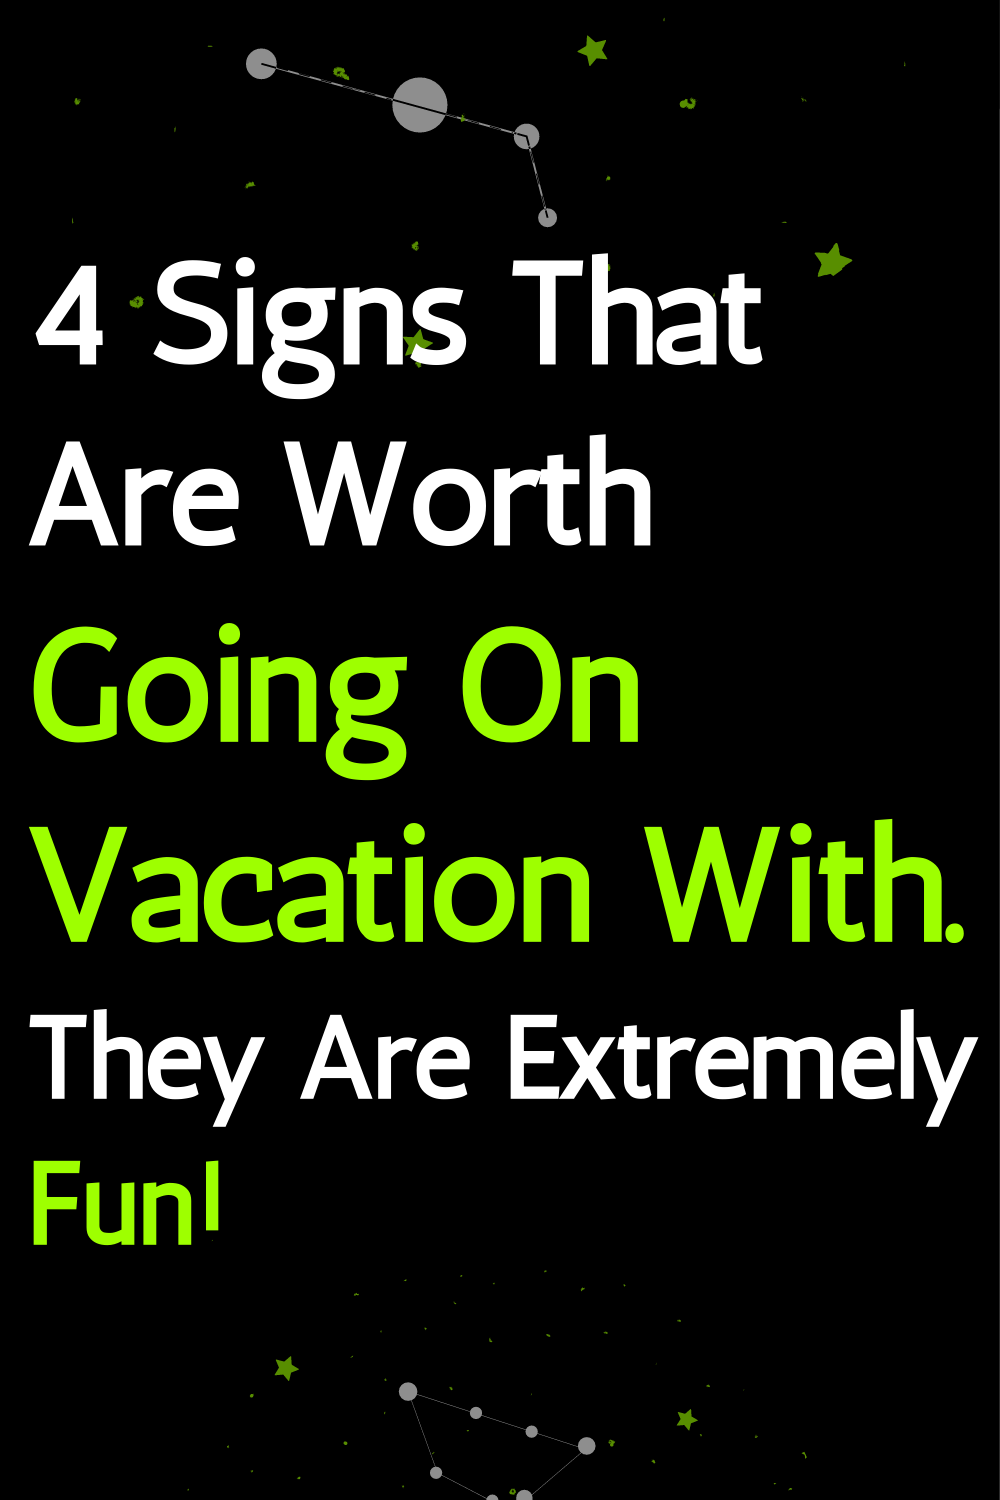 4 Signs That Are Worth Going On Vacation With. They Are Extremely Fun!